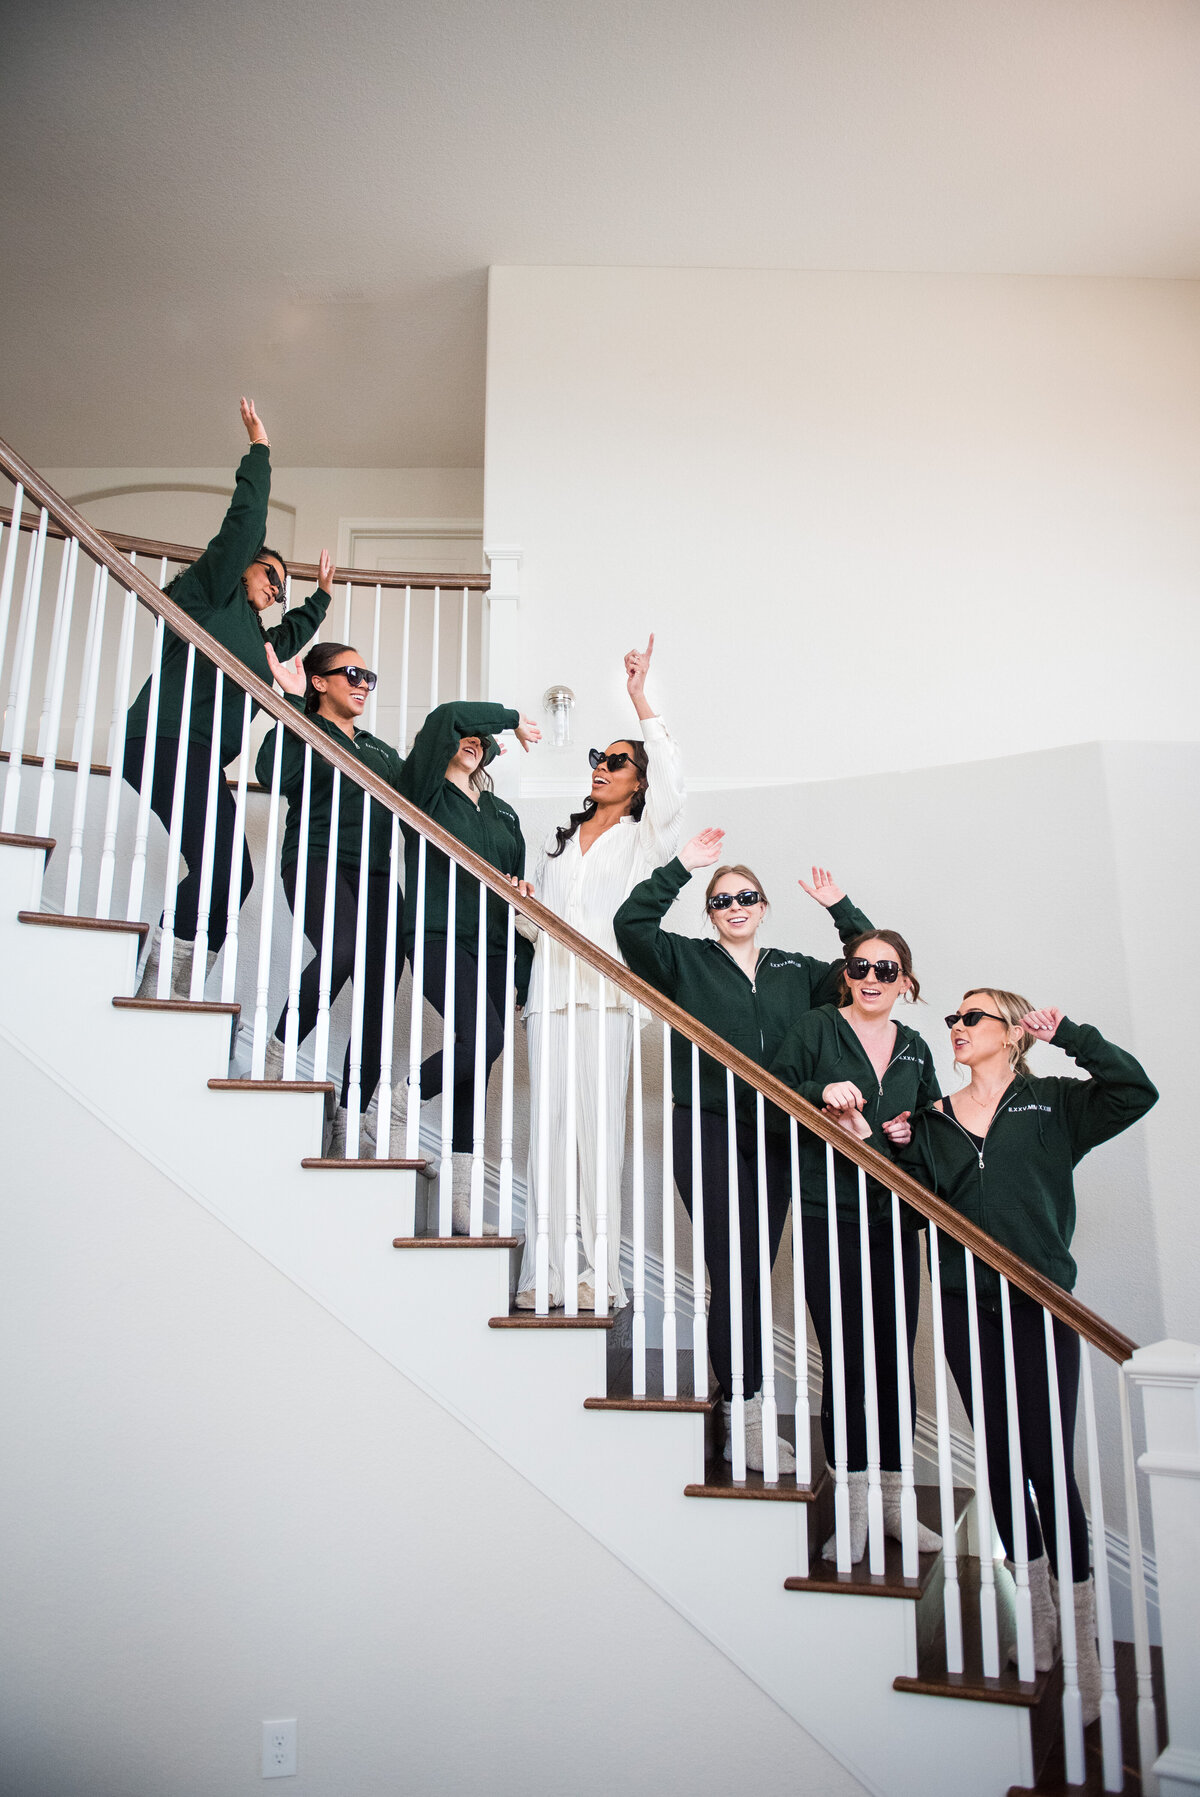 A bride and her bridesmaids are dressed in pajamas and sunglasses, standing on a stairwell and making fun poses.